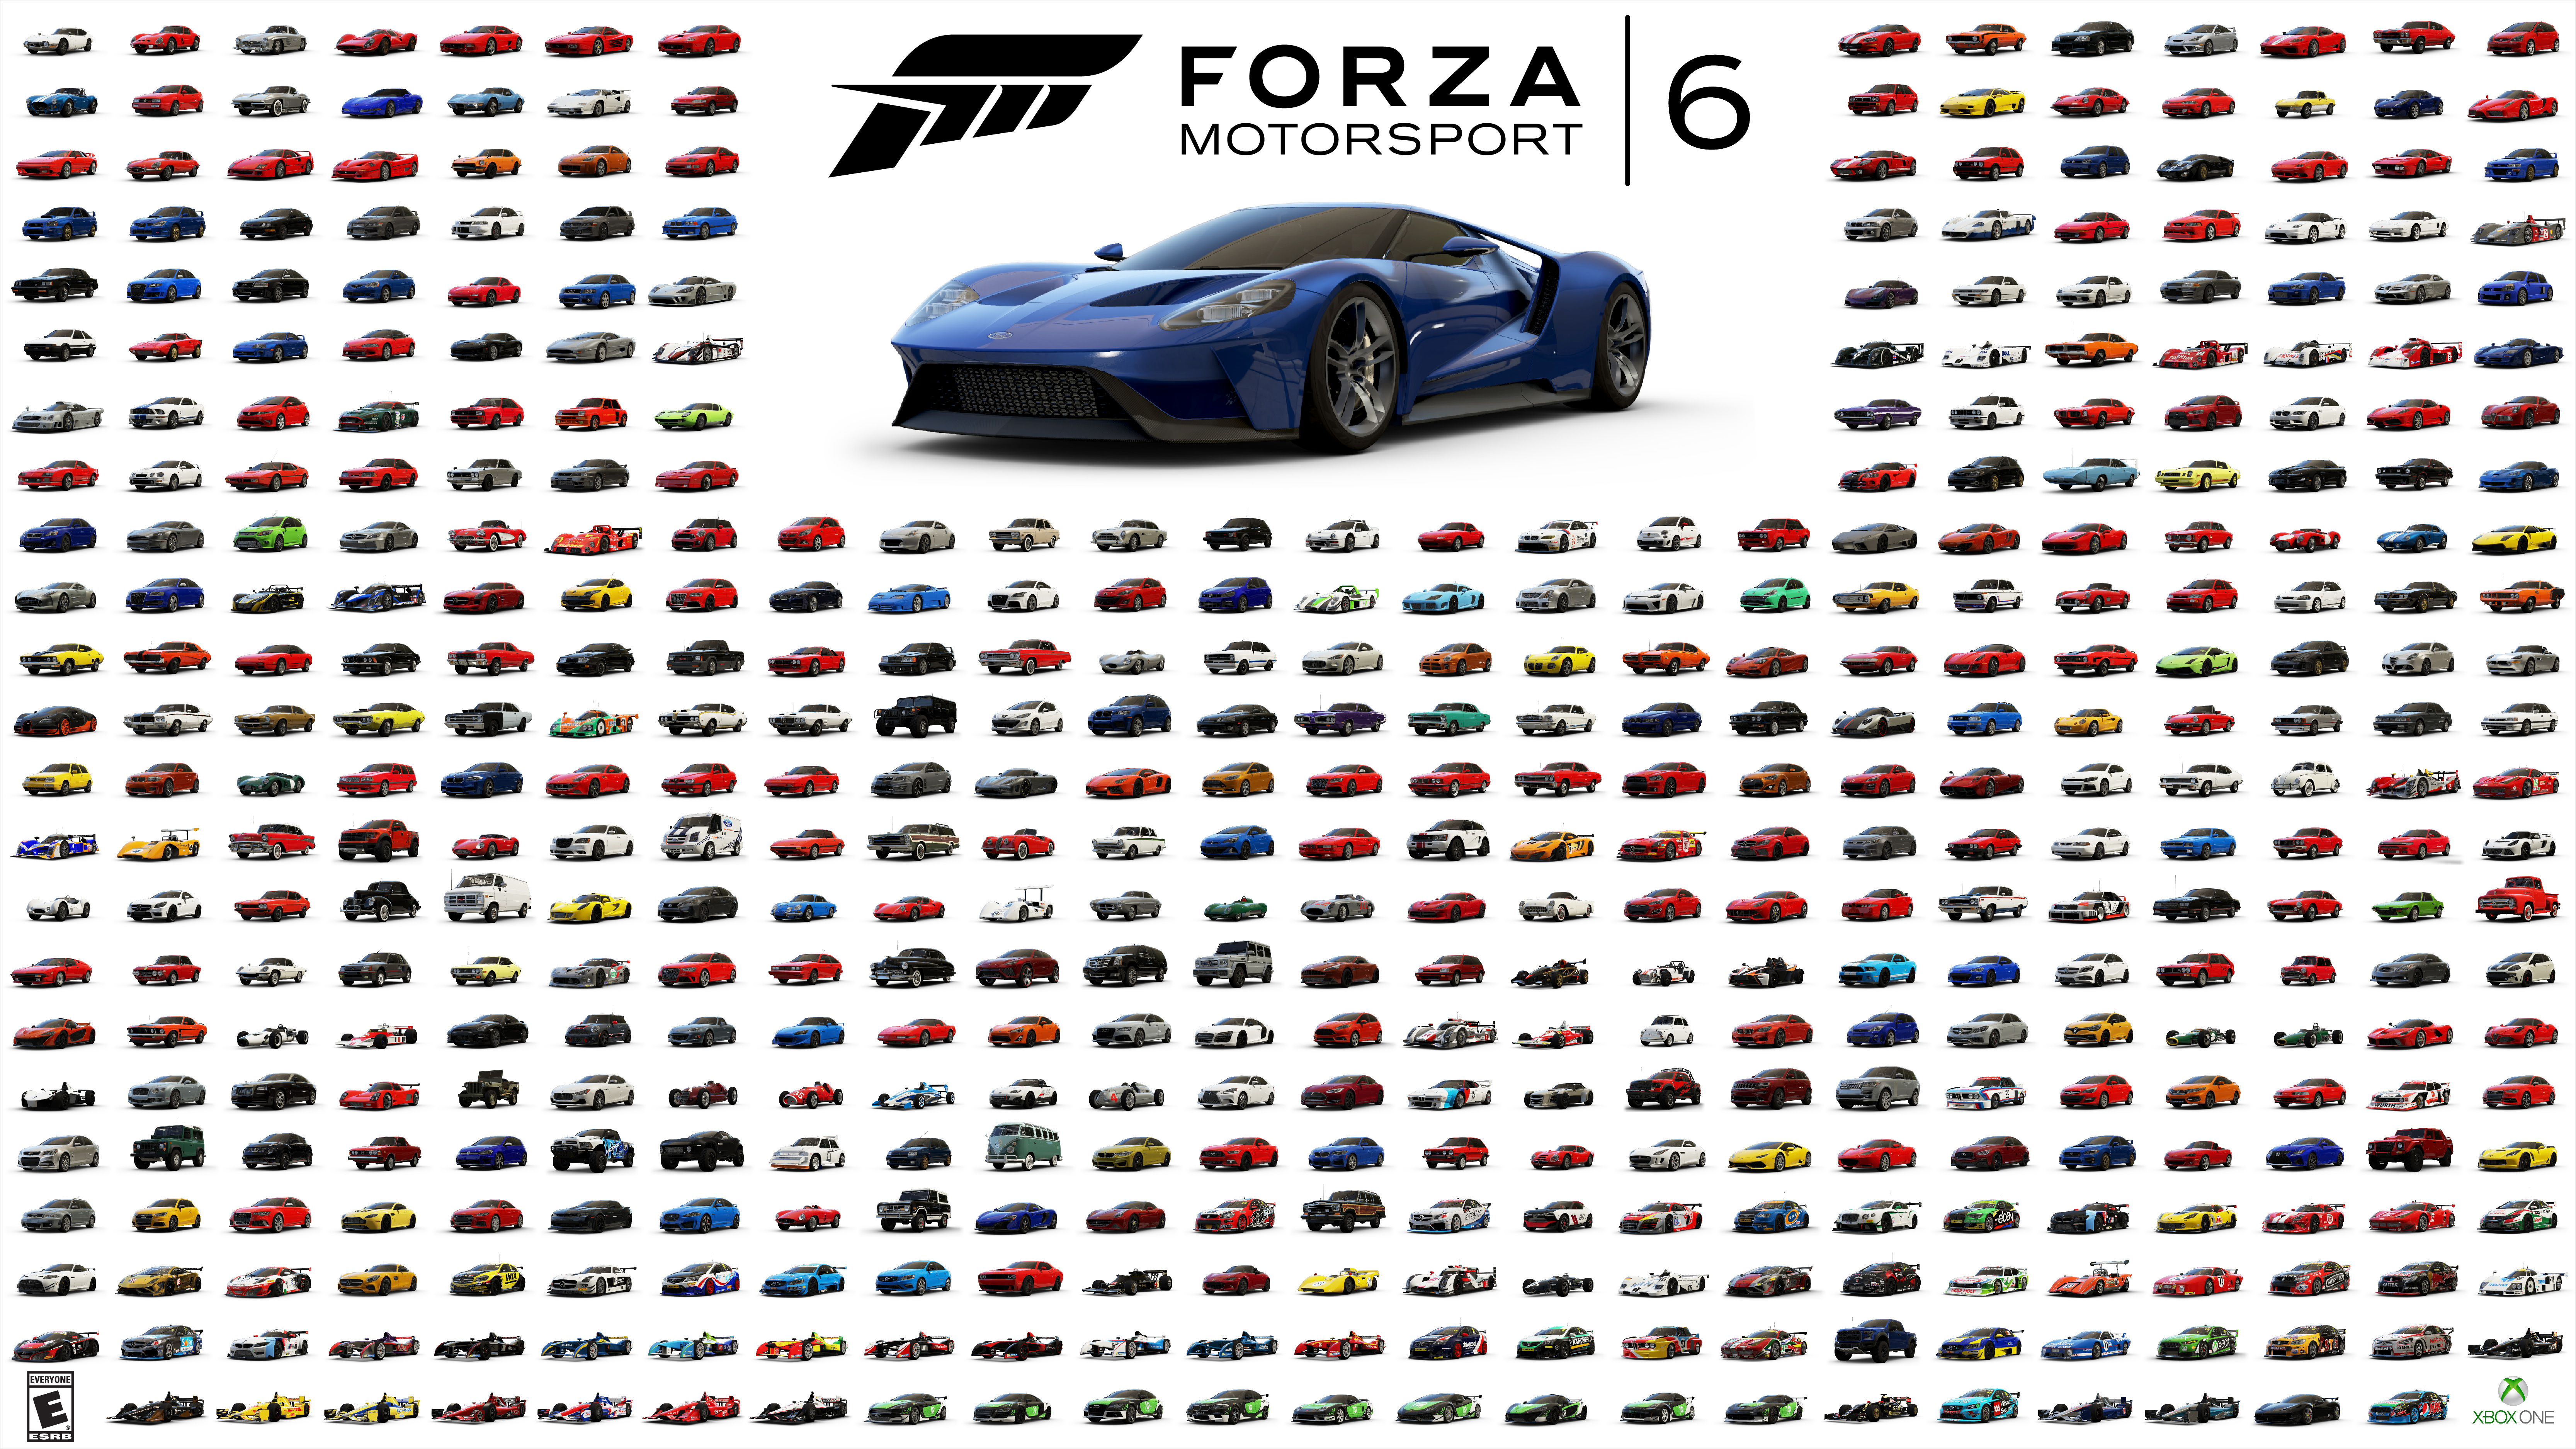 On Your Mark – The Forza Motorsport 6 Demo is Now Available - Xbox Wire